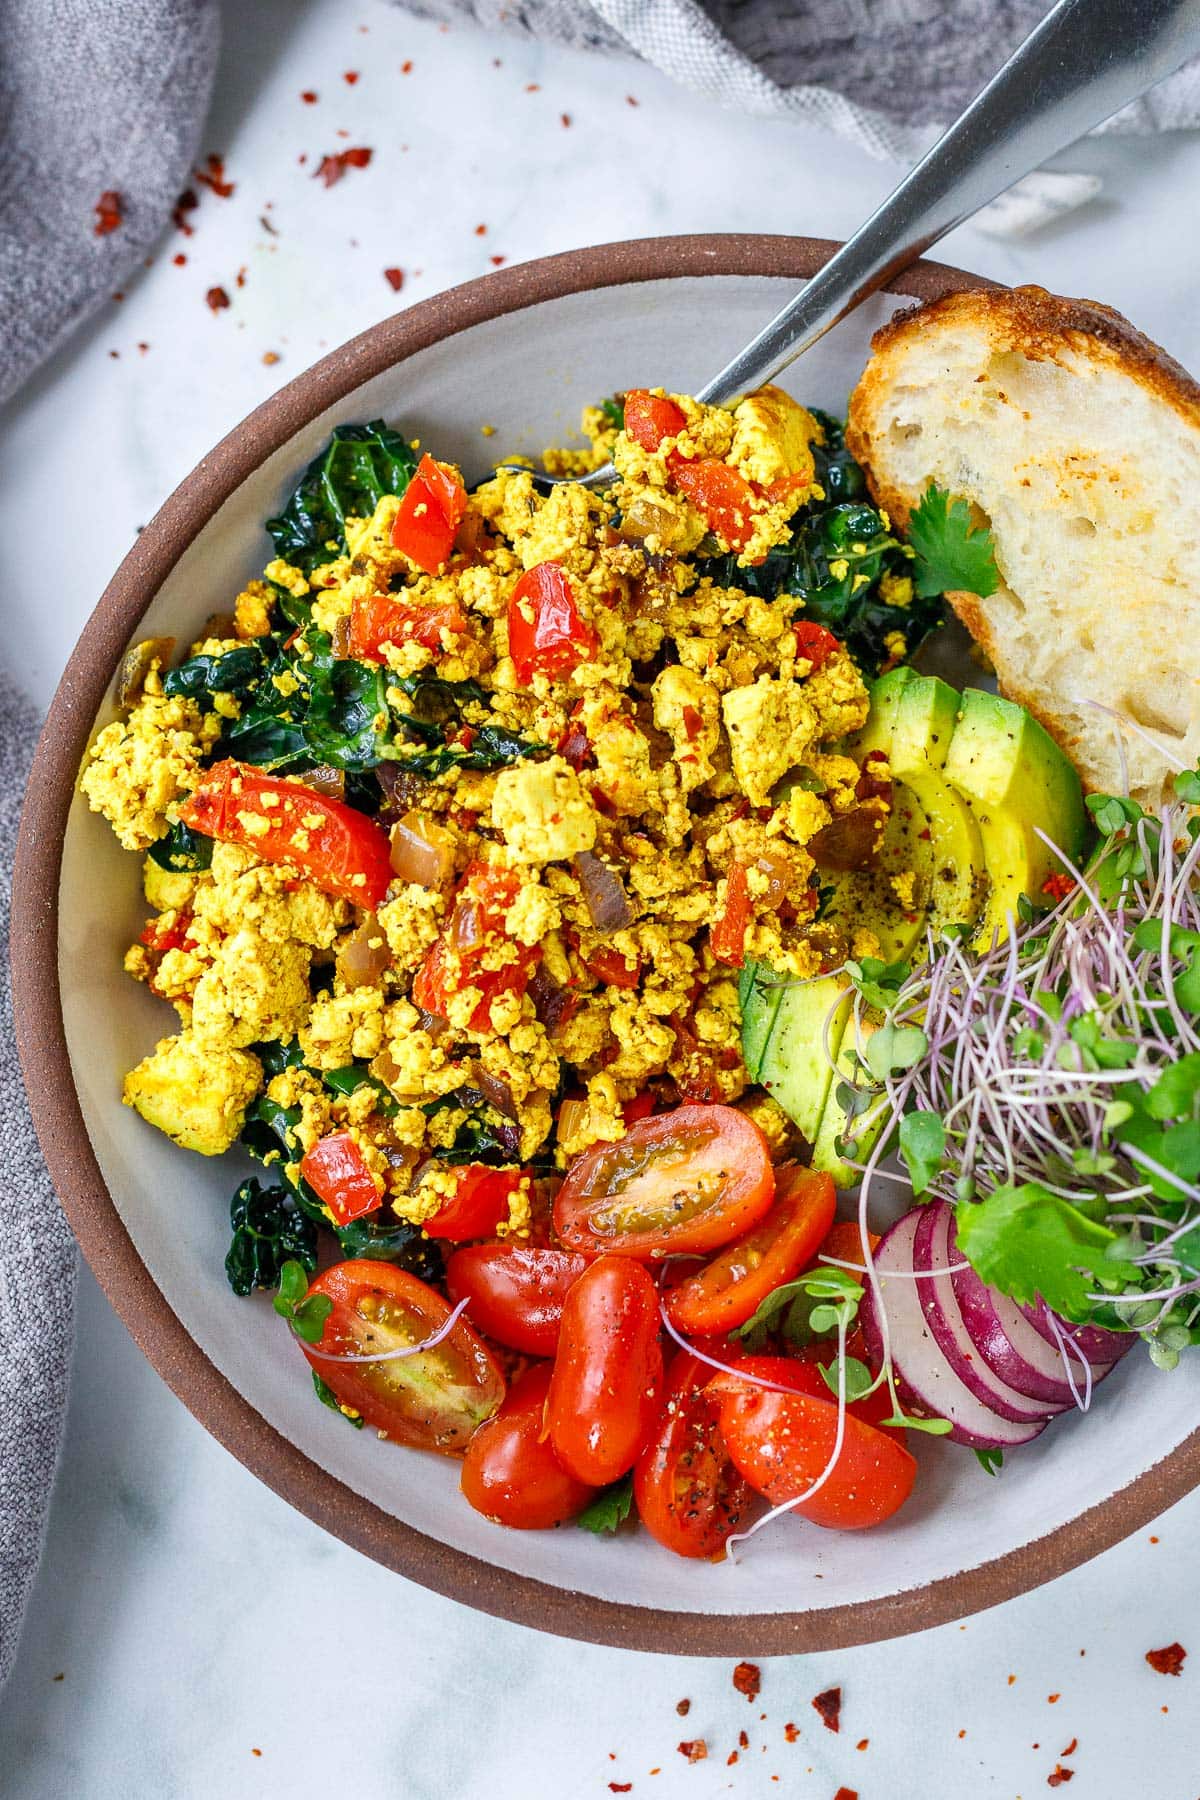 A vegan version of scrambled eggs, this Tofu Scramble recipe is so delicious! Load it up with seasonal veggies that you already have on hand, or keep it plain and simple- either way, you'll love this high-protein vegan breakfast. Make it in 15 minutes!